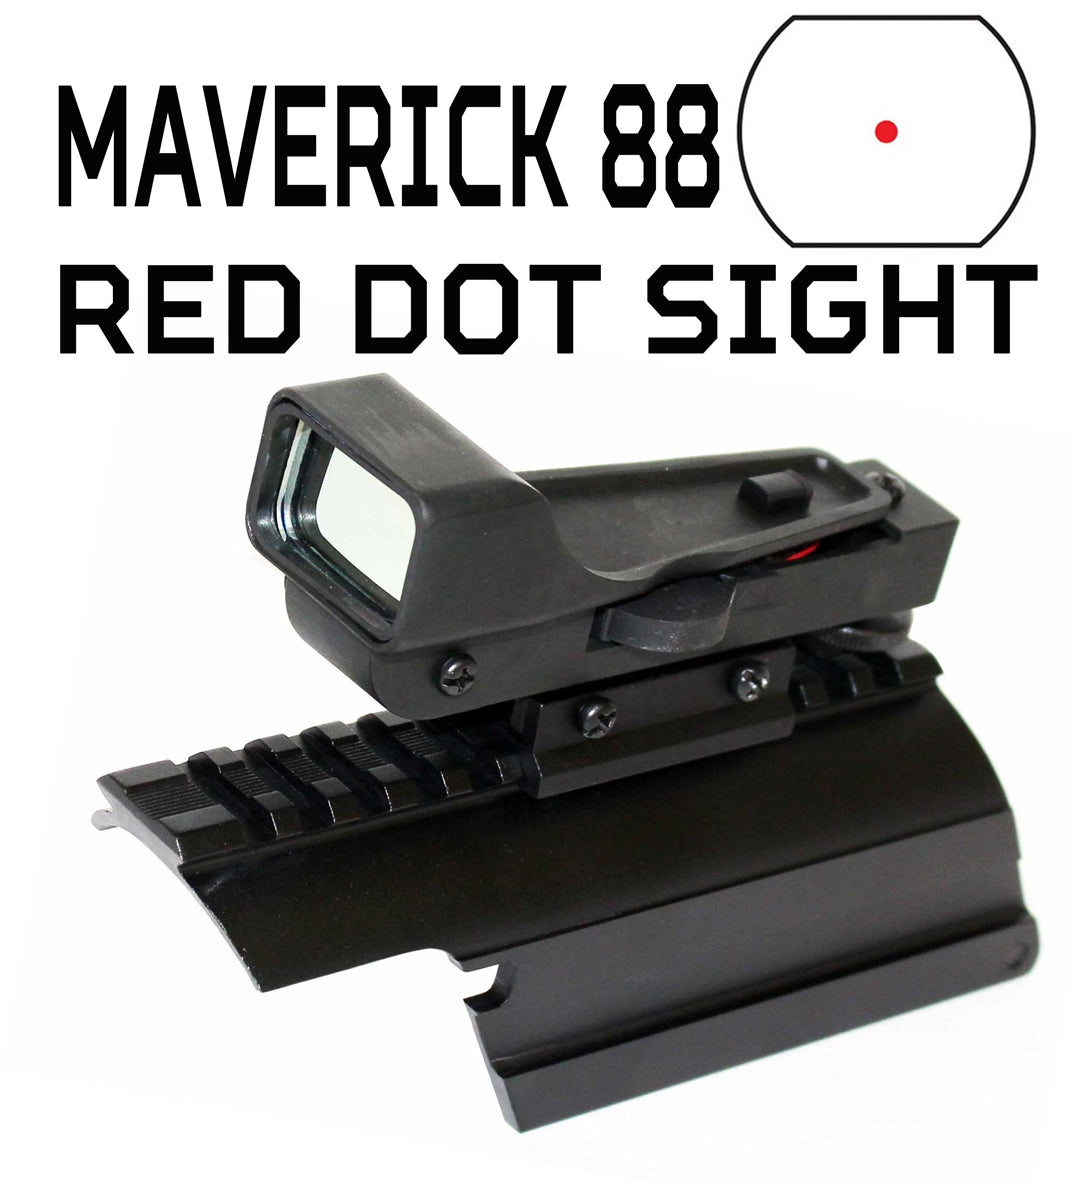 Trinity Saddle Picatinny mount Adapter With Red Dot Reflex Sight For Mossberg Maverick 88 12 Gauge Pump.